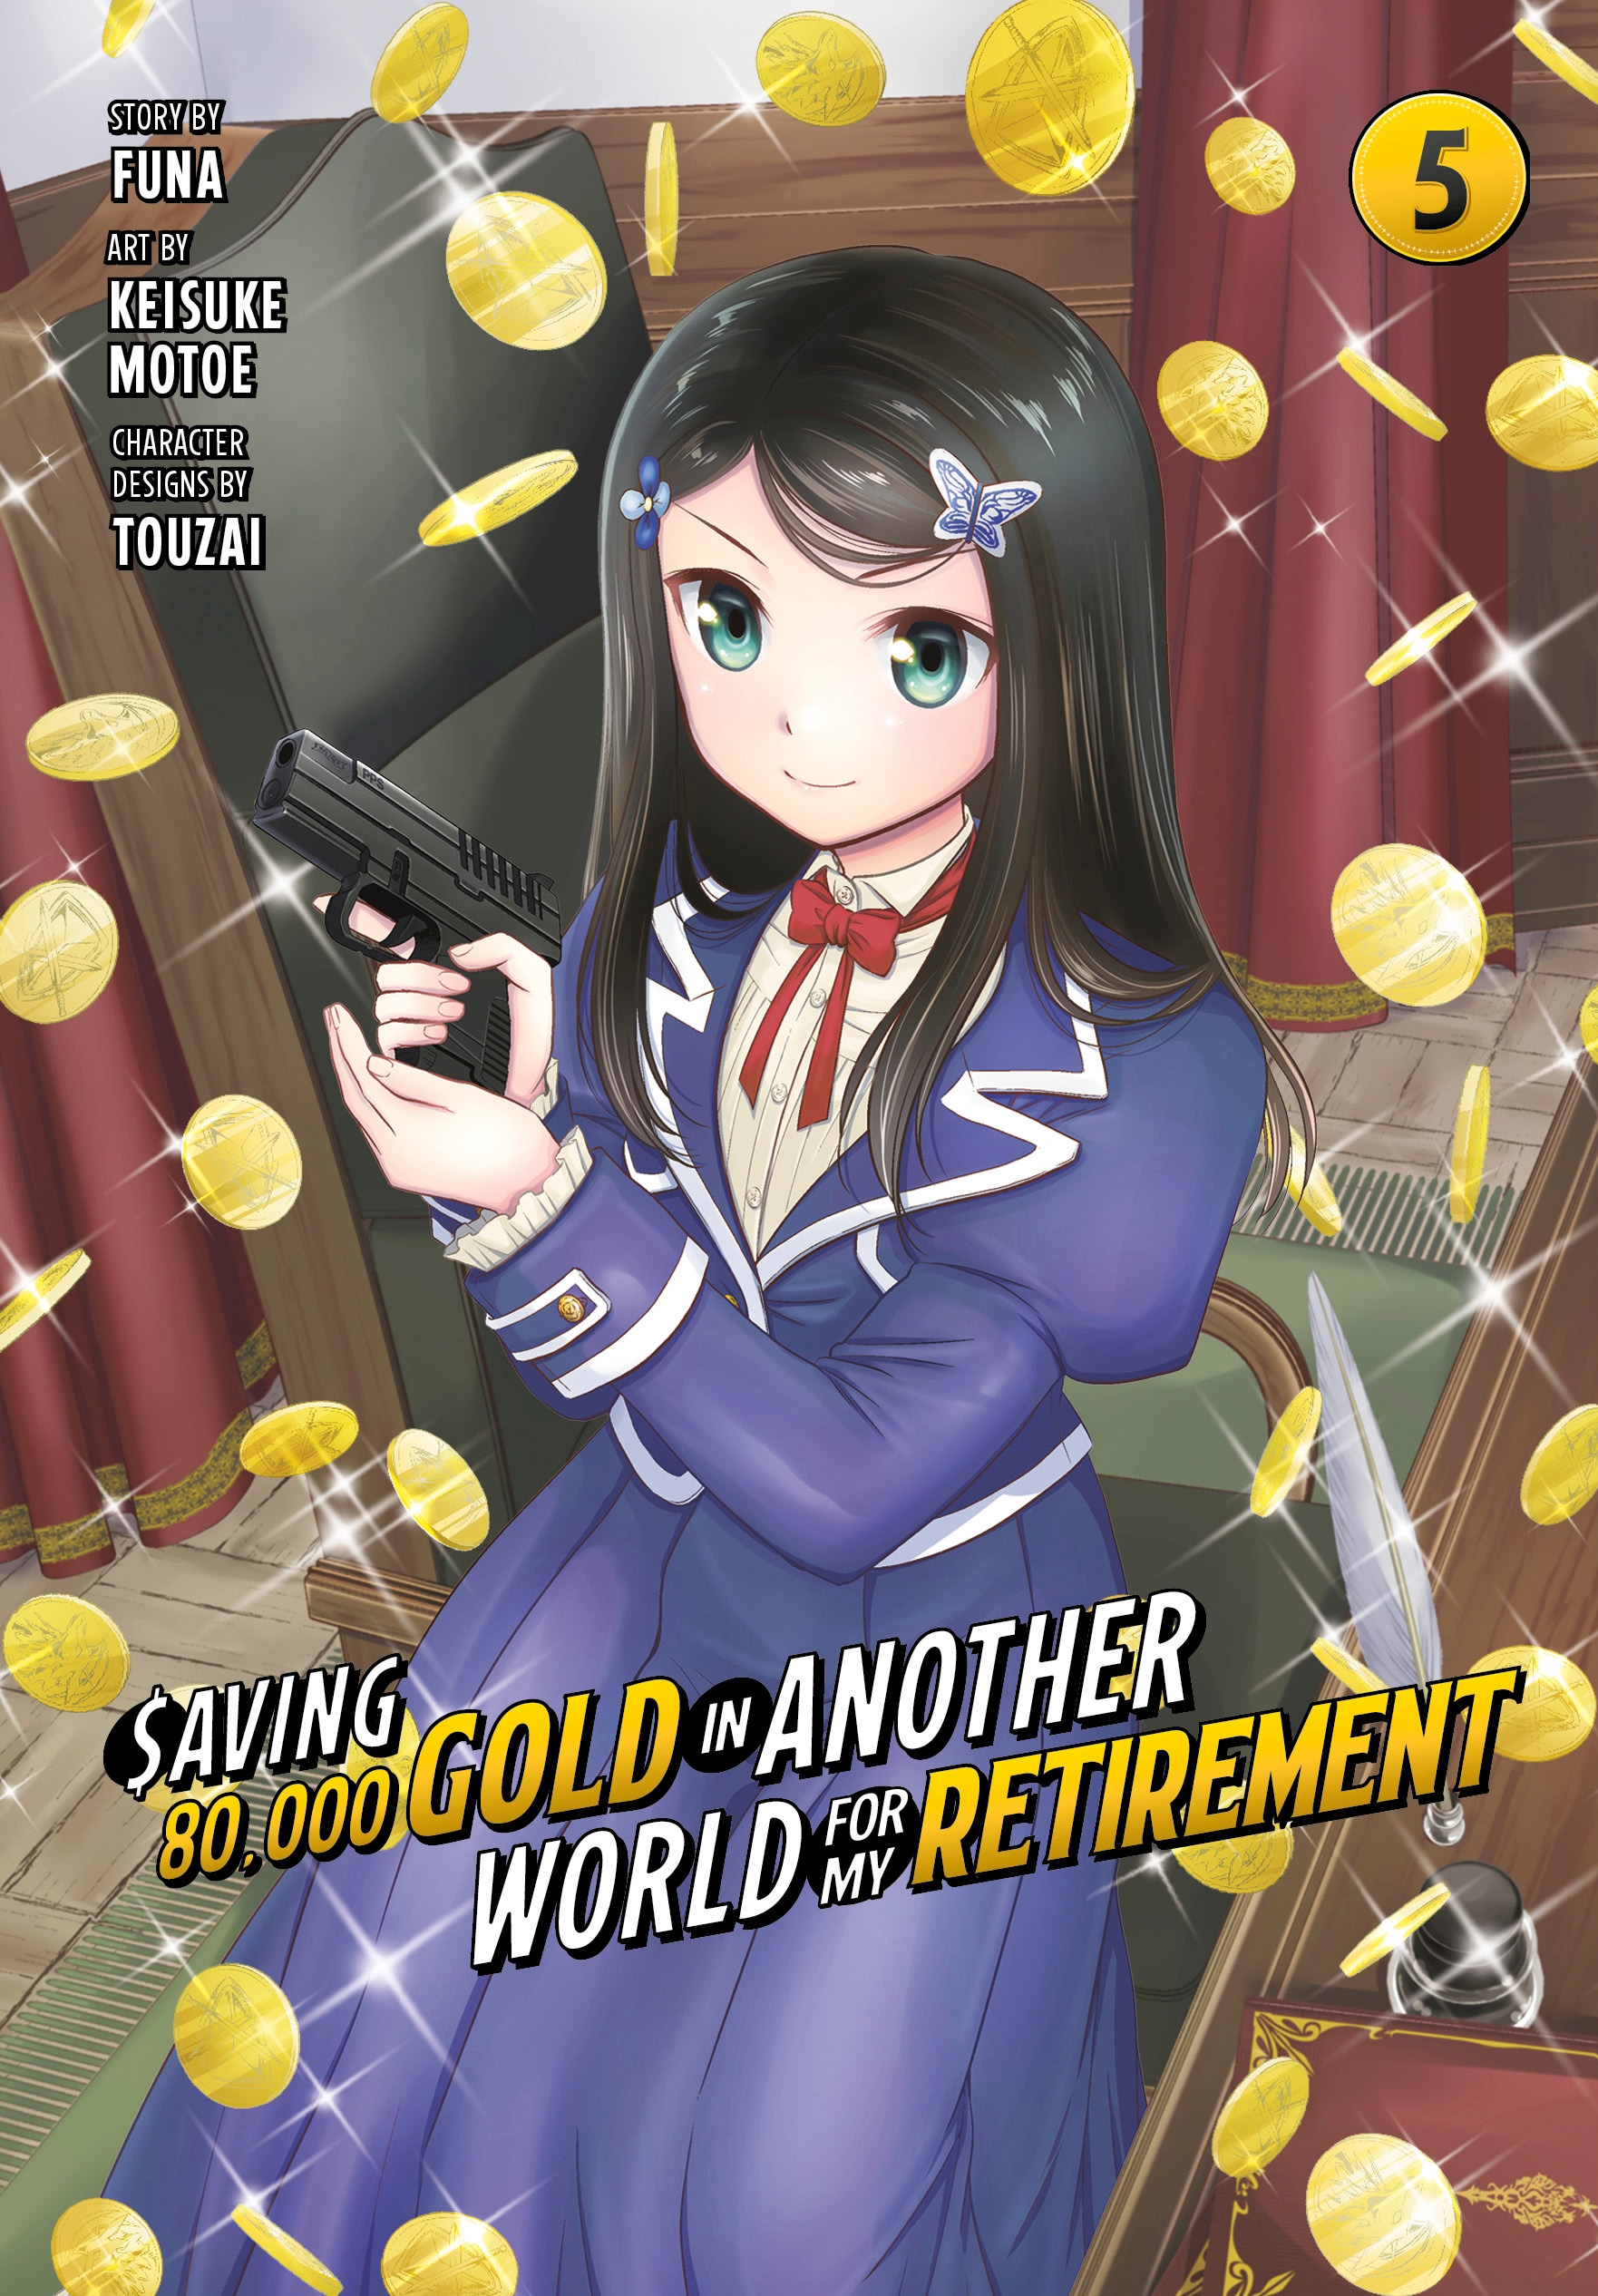 Saving 80,000 Gold in Another World for My Retirement 5 (Manga) by 